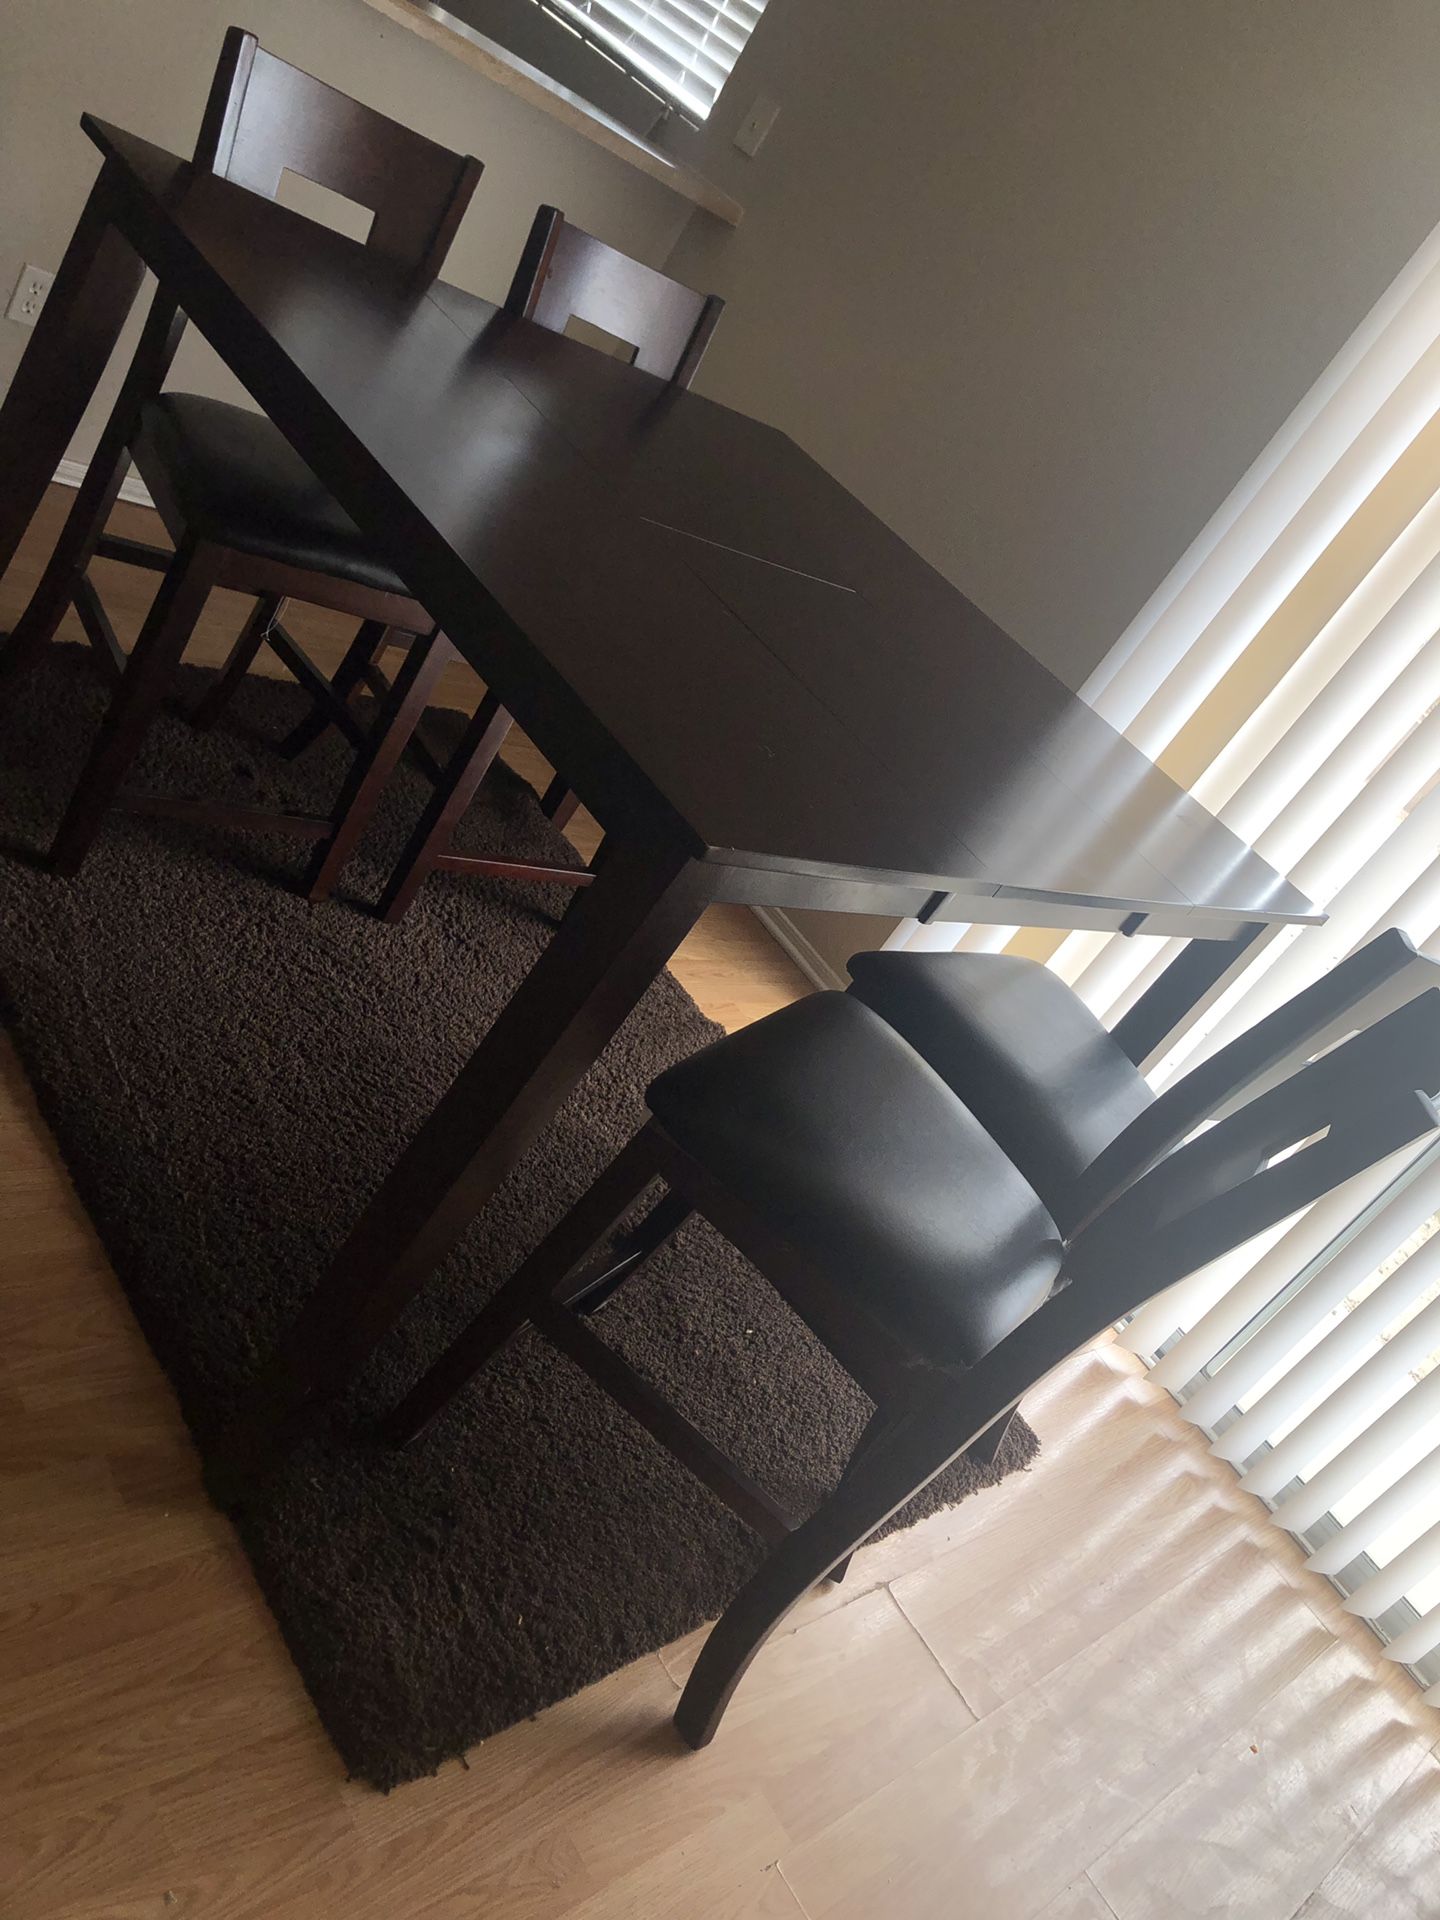 Great condition Ikea Wood table low price needs to go! Additional add on rug will be $50 No low ballers please thanks!